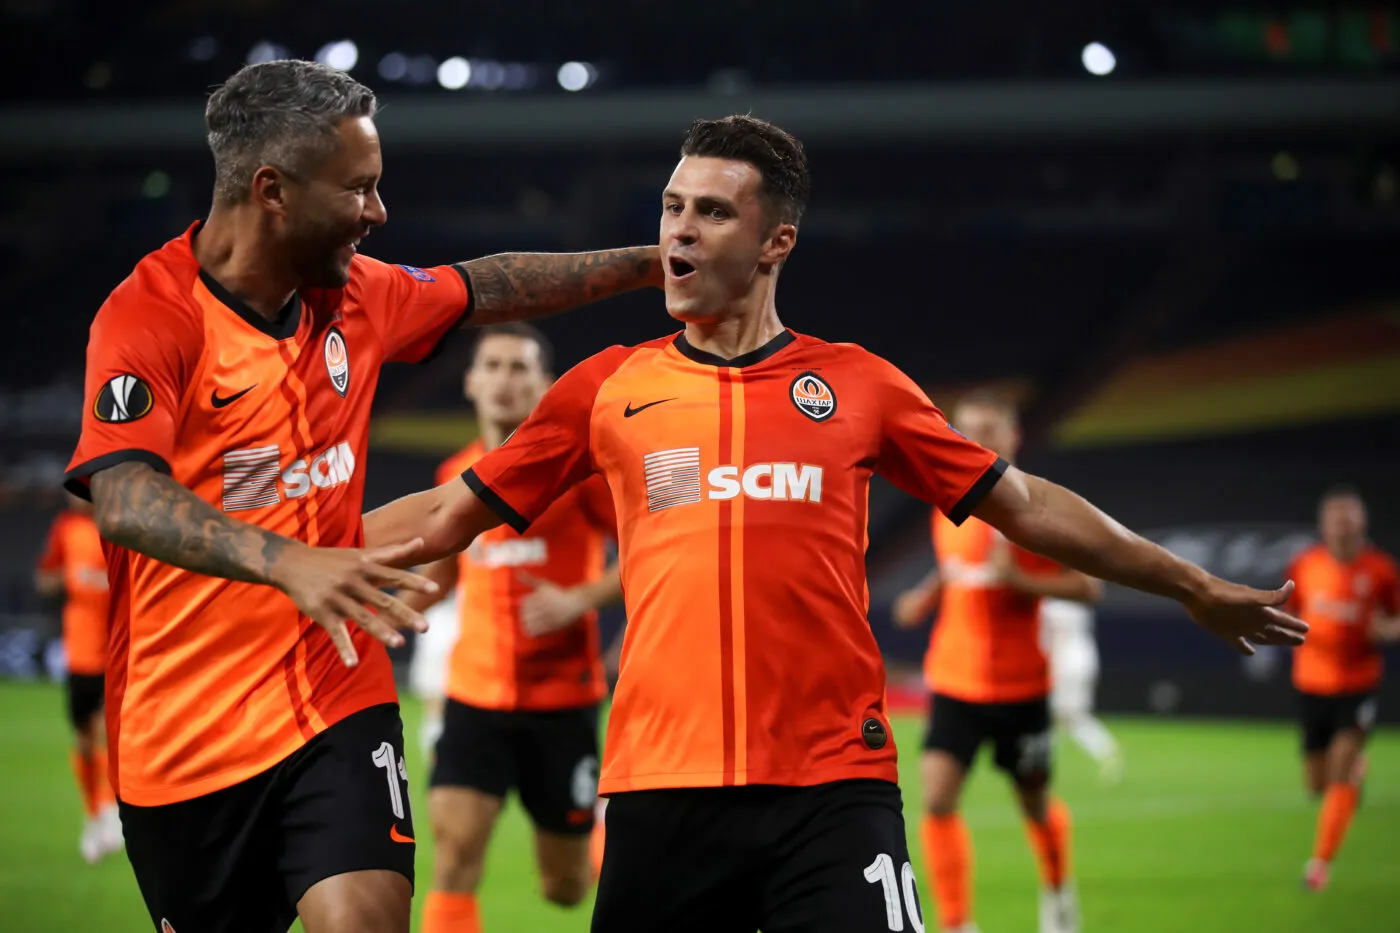 GELSENKIRCHEN, GERMANY - AUGUST 11: Junior Moraes of Shakhtar Donetsk celebrates with teammate Marlos after scoring his sides first goal during the UEFA Europa League Quarter Final between Shakhtar Donetsk and FC Basel at Veltins-Arena on August 11, 2020 in Gelsenkirchen, Germany. (Photo by Alex Grimm - UEFA/POOL/ICON SPORT)   - Photo by Icon Sport